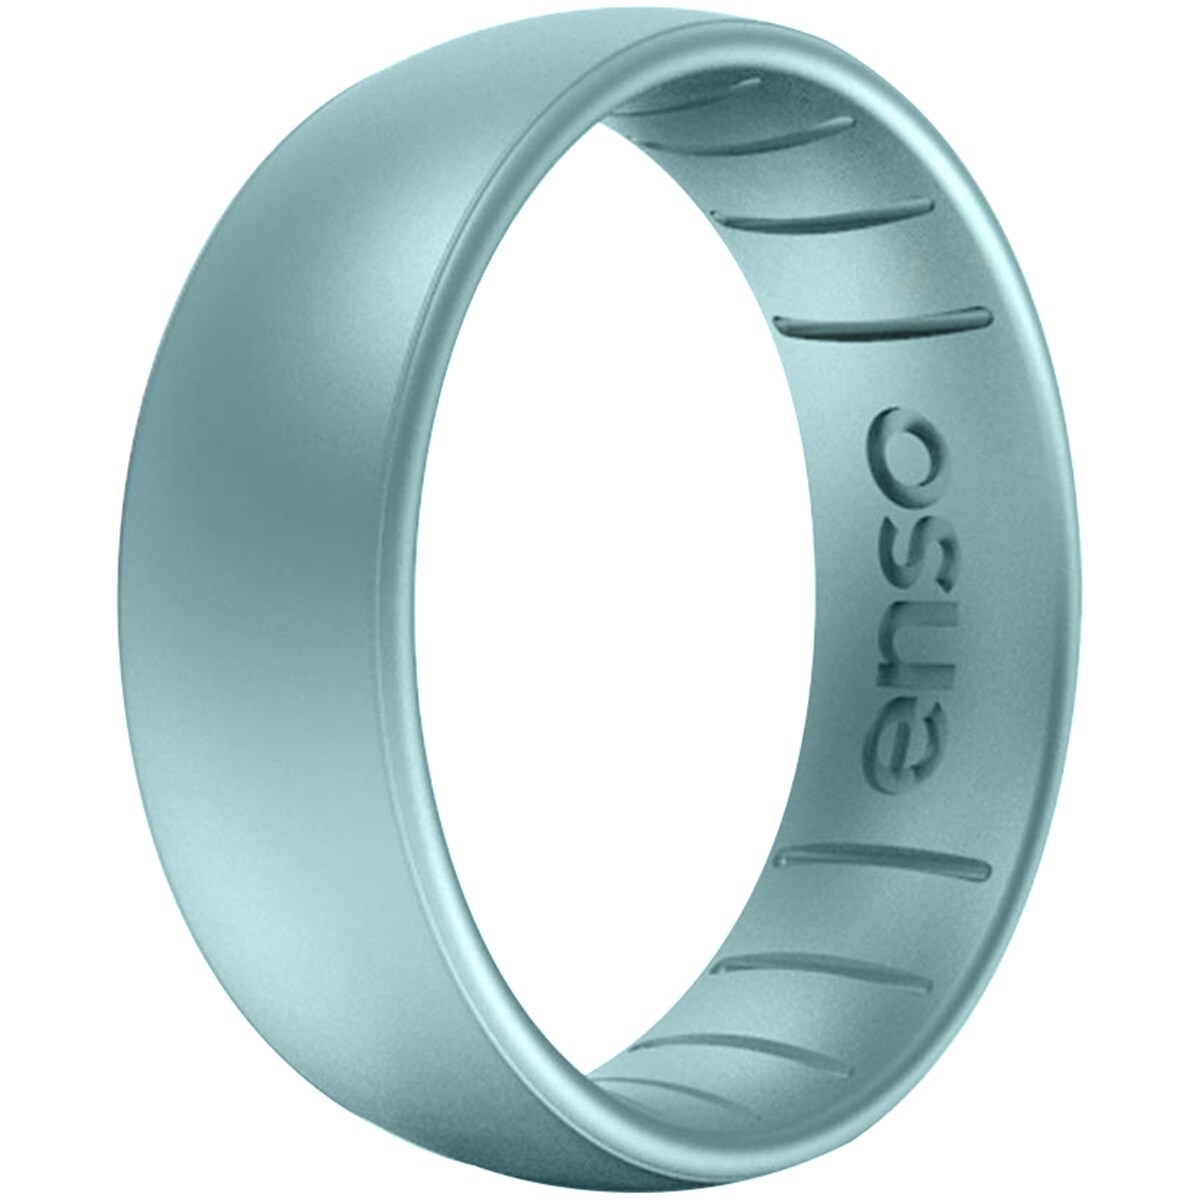 Enso Rings Classic Legends Series Silicone Ring